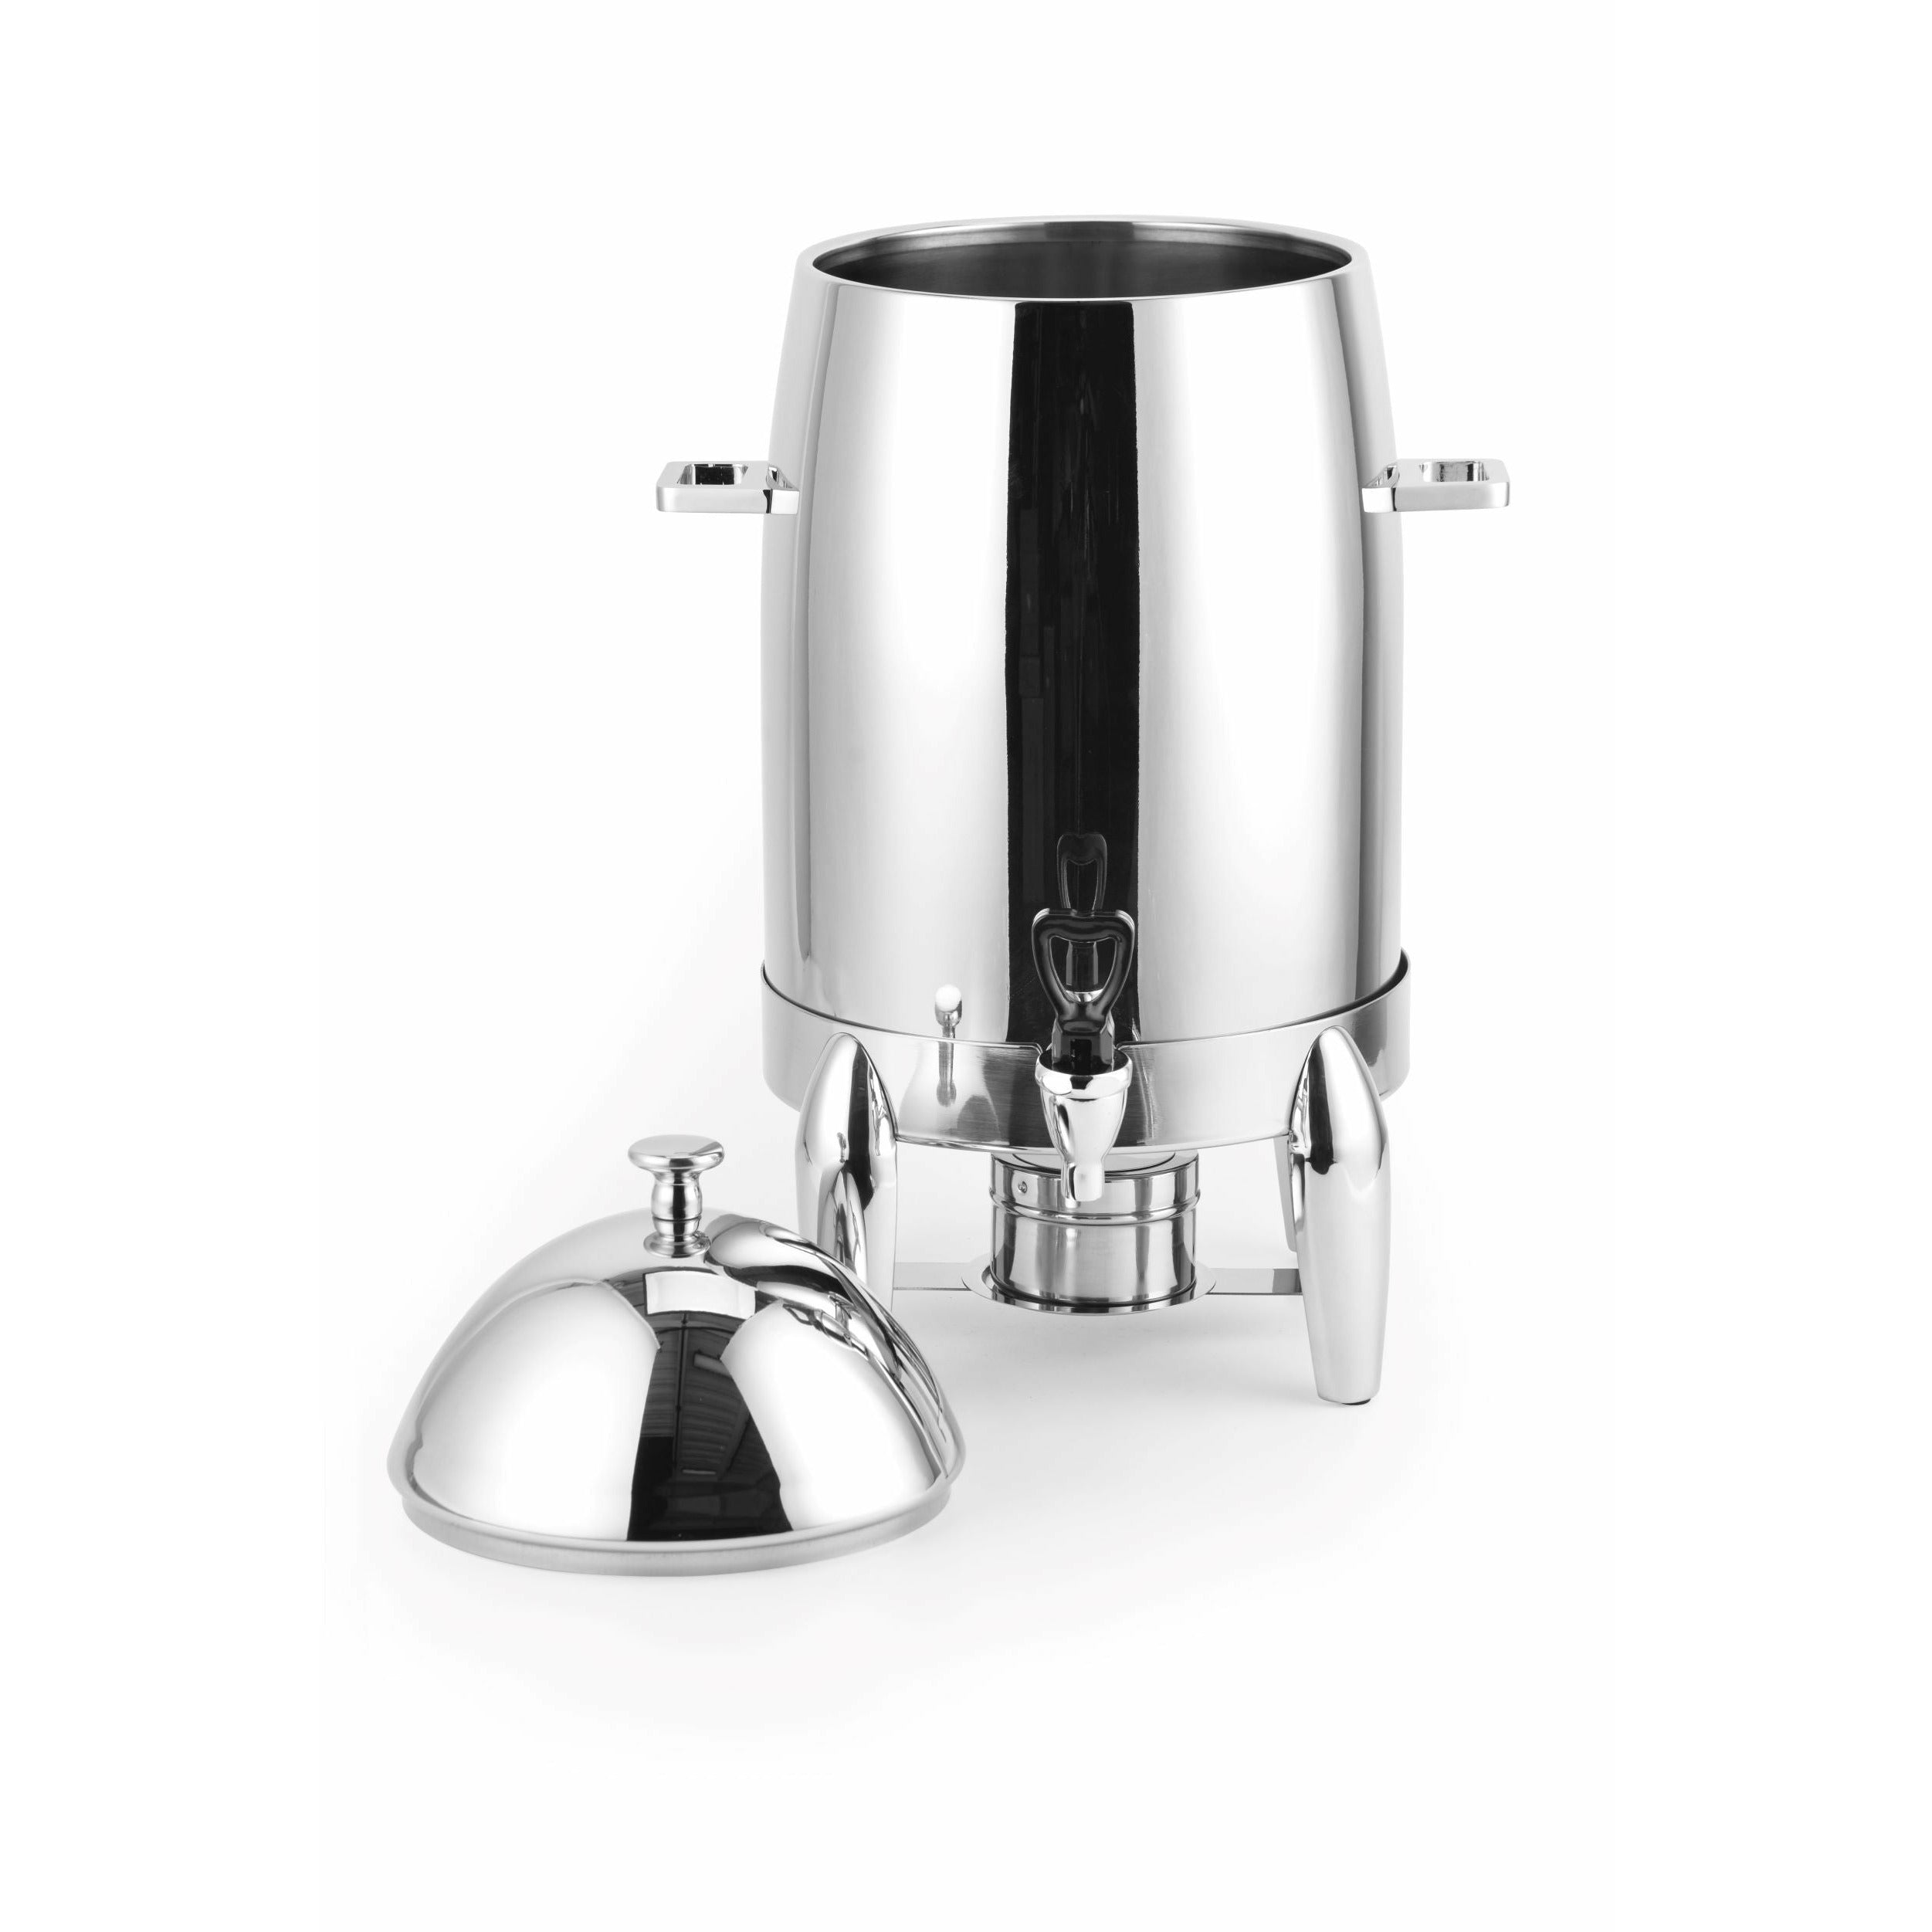 Stainless Steel Hot Beverage Dispenser durable and  long-lasting Chafer Urn with Chrome Accents - 5 Gallon capacity-(48 cup): Coffee  Urns